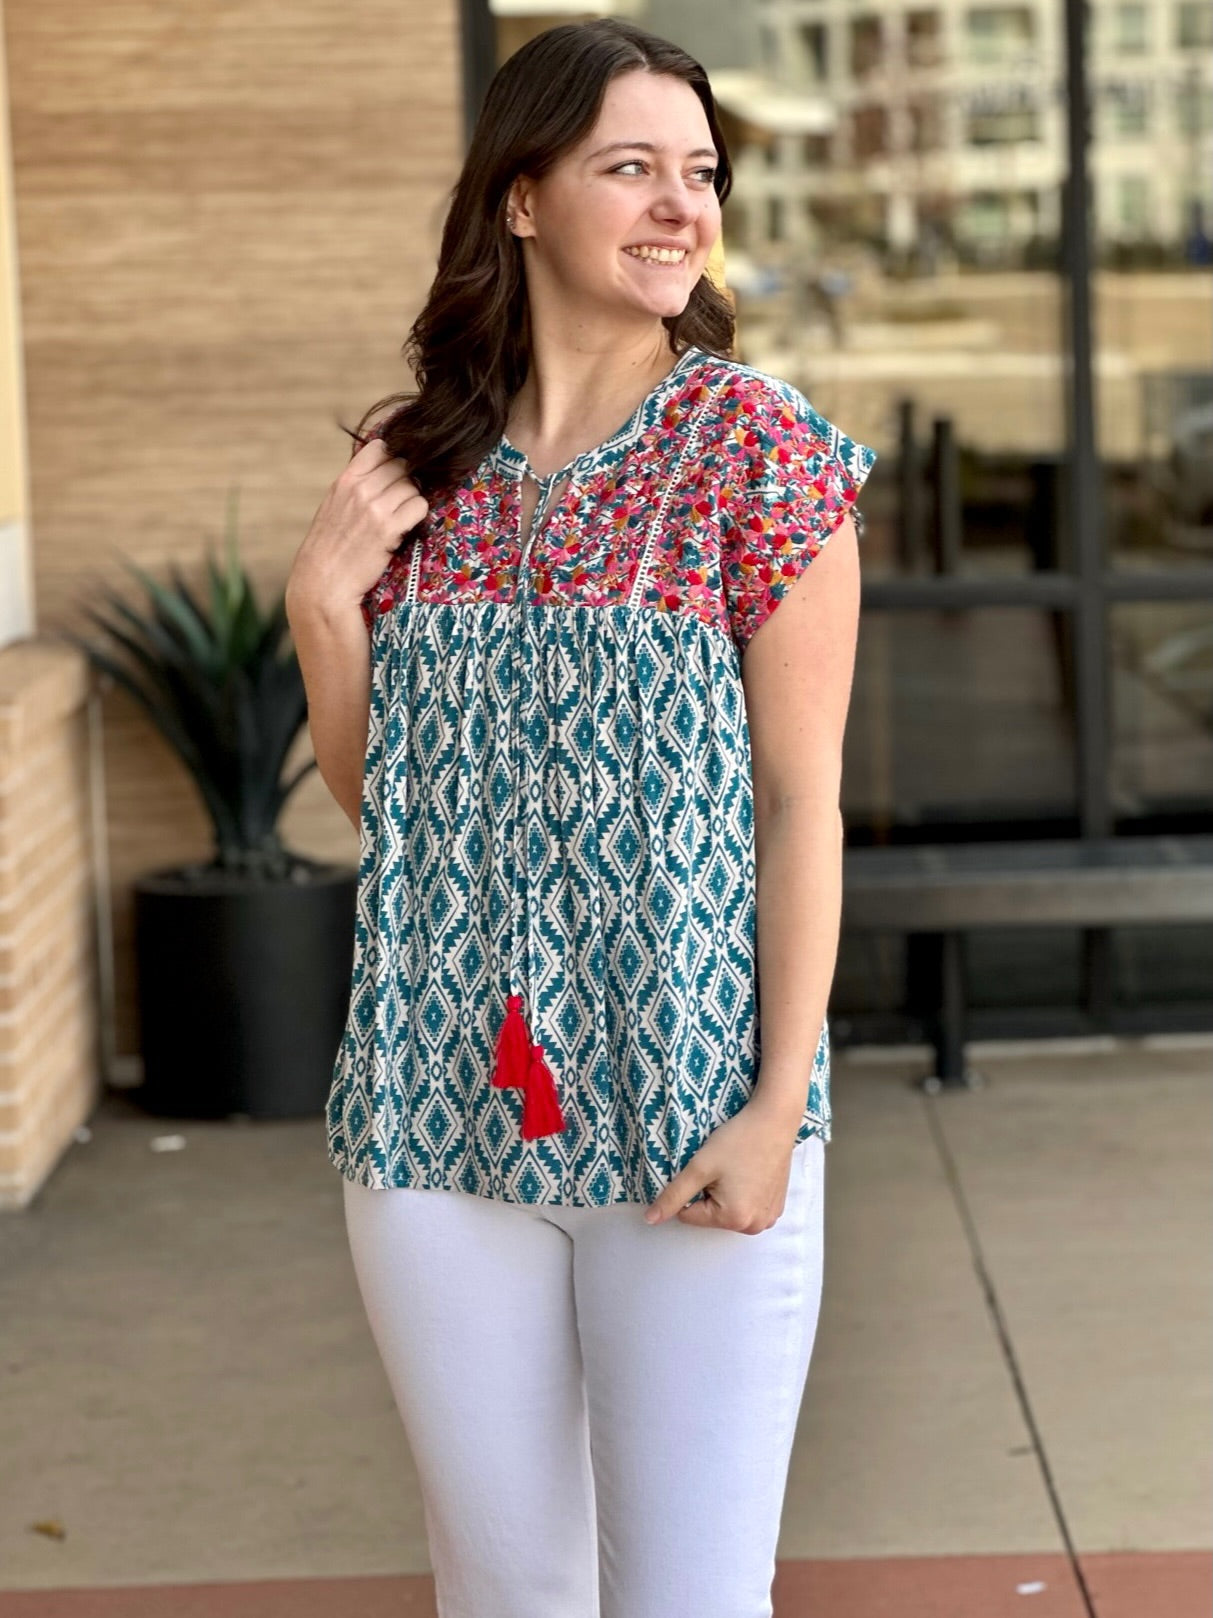 MEGAN IN EMBROIDERED TEAL TOP LOOKING RIGHT